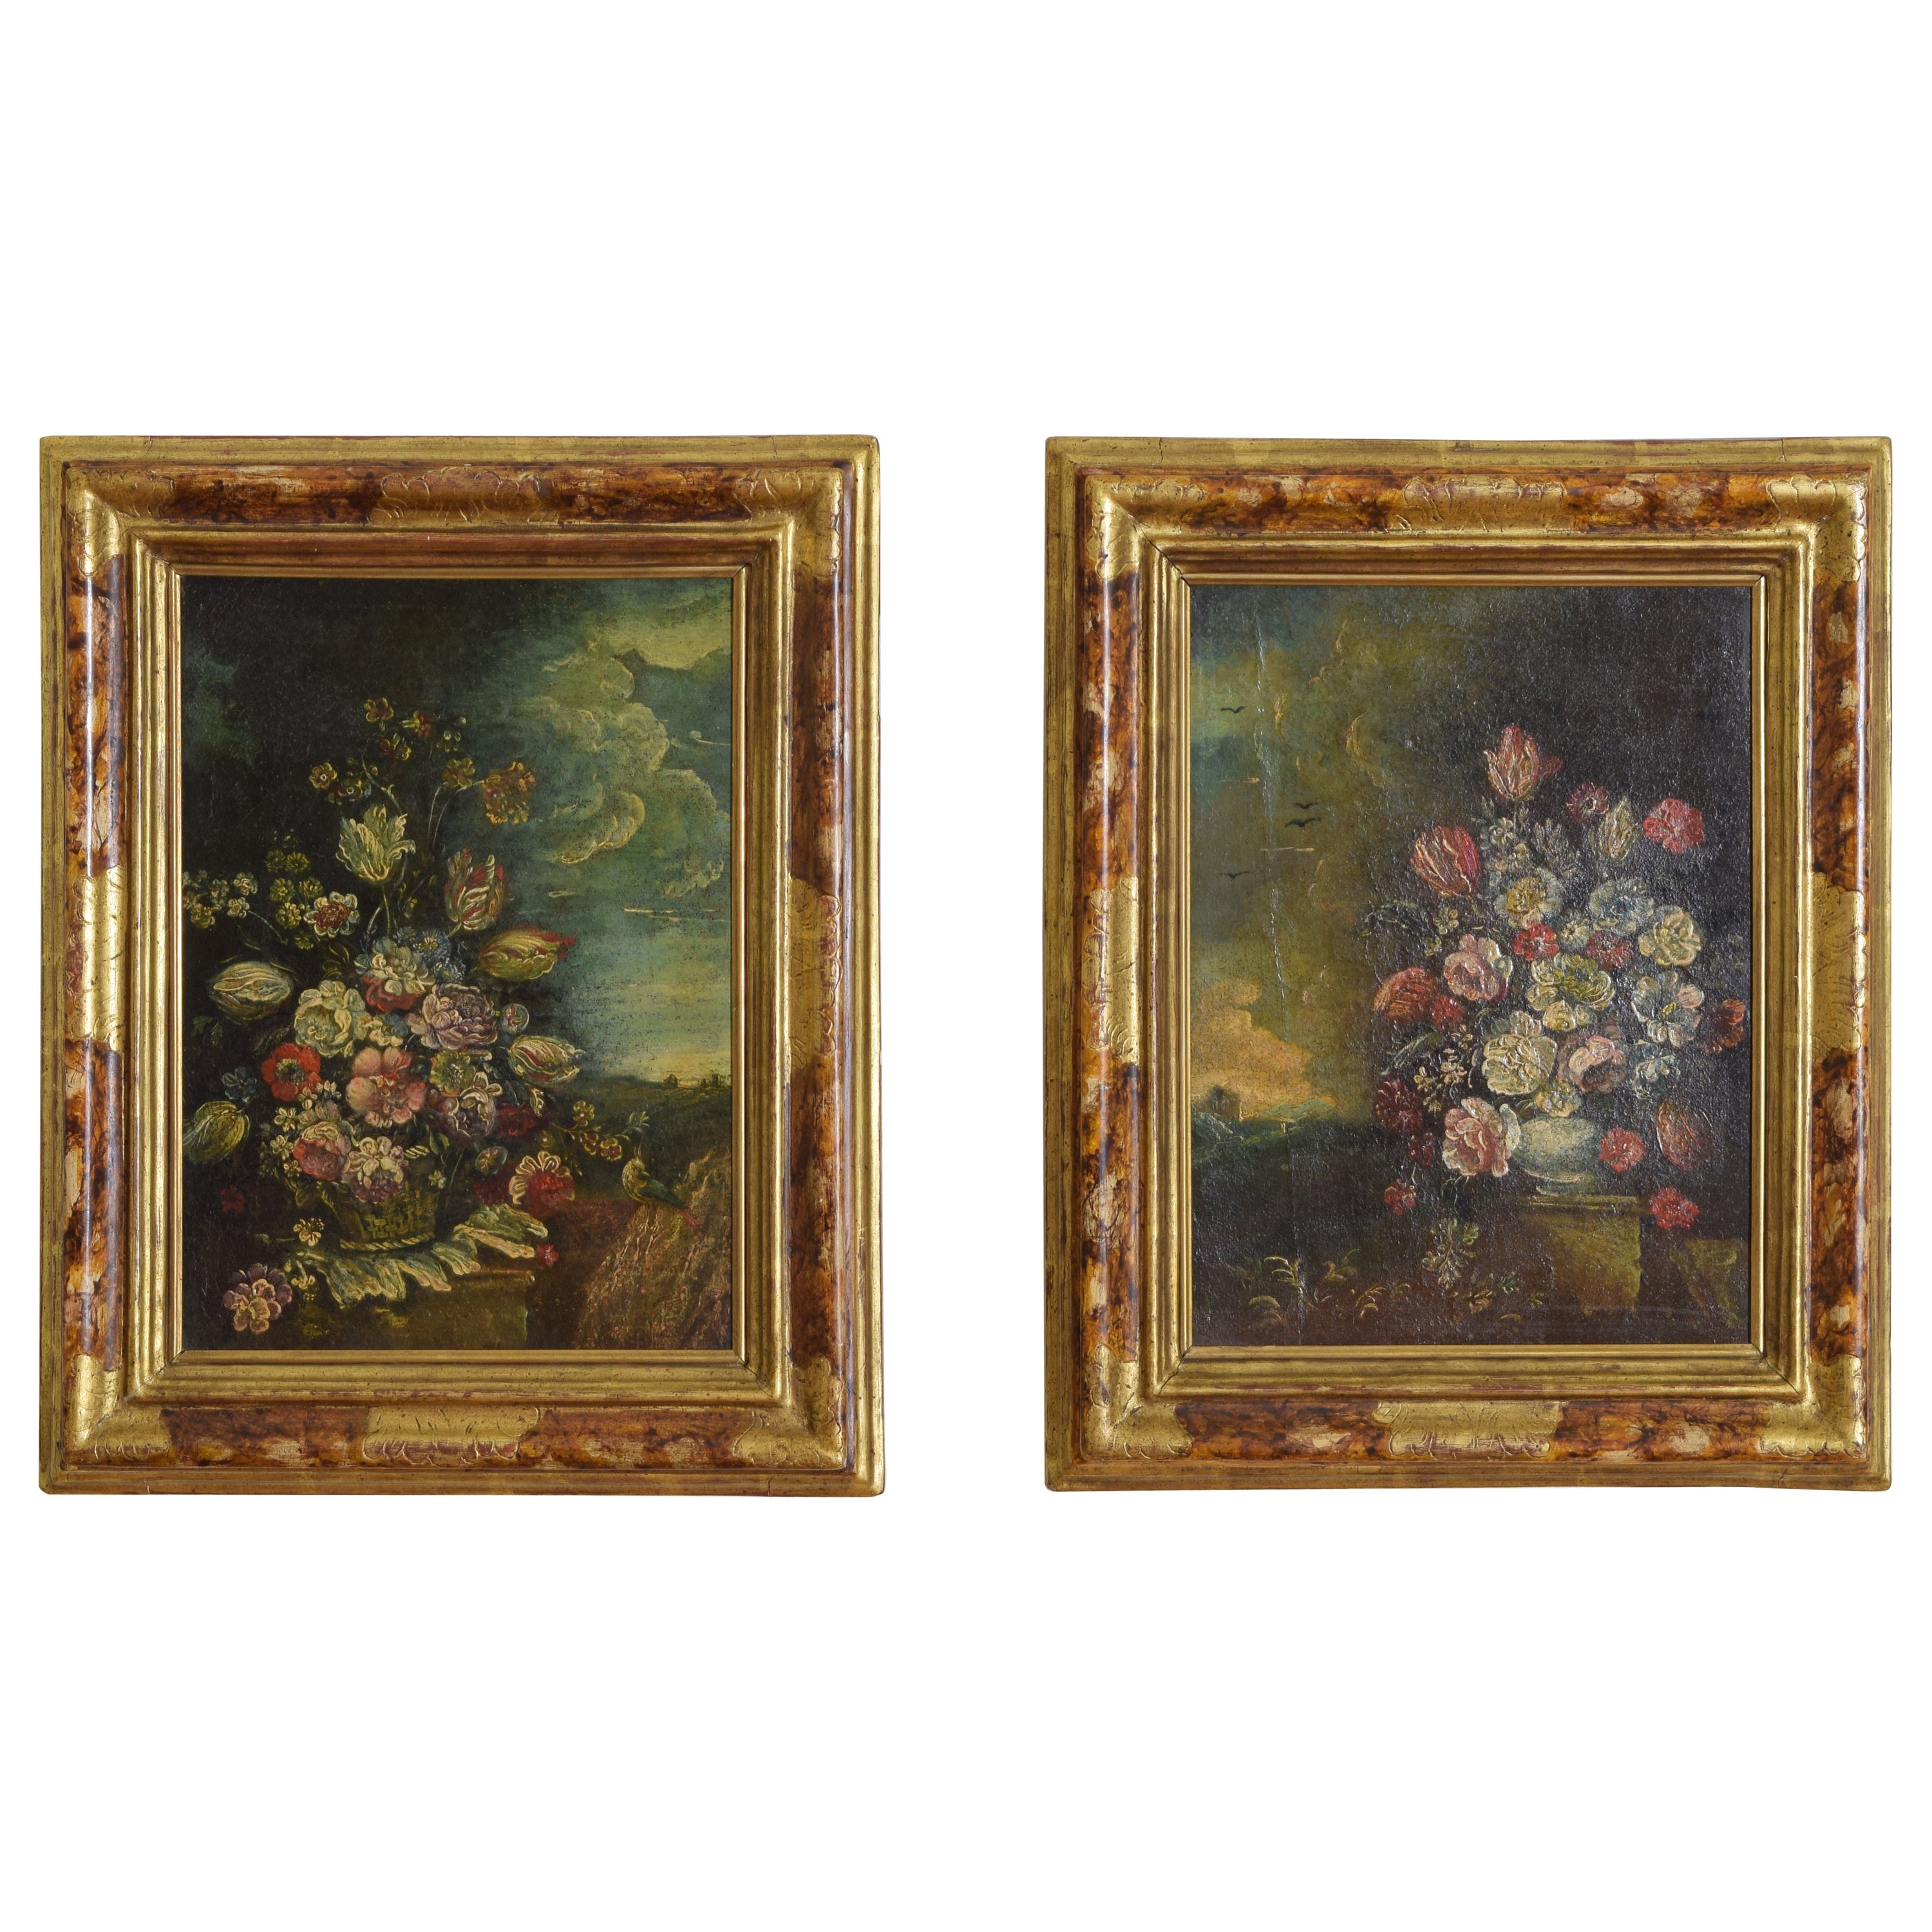 Italian Rococo Period Pair of Oils Depicting Floral Arrangements, Mid-18th cen. For Sale